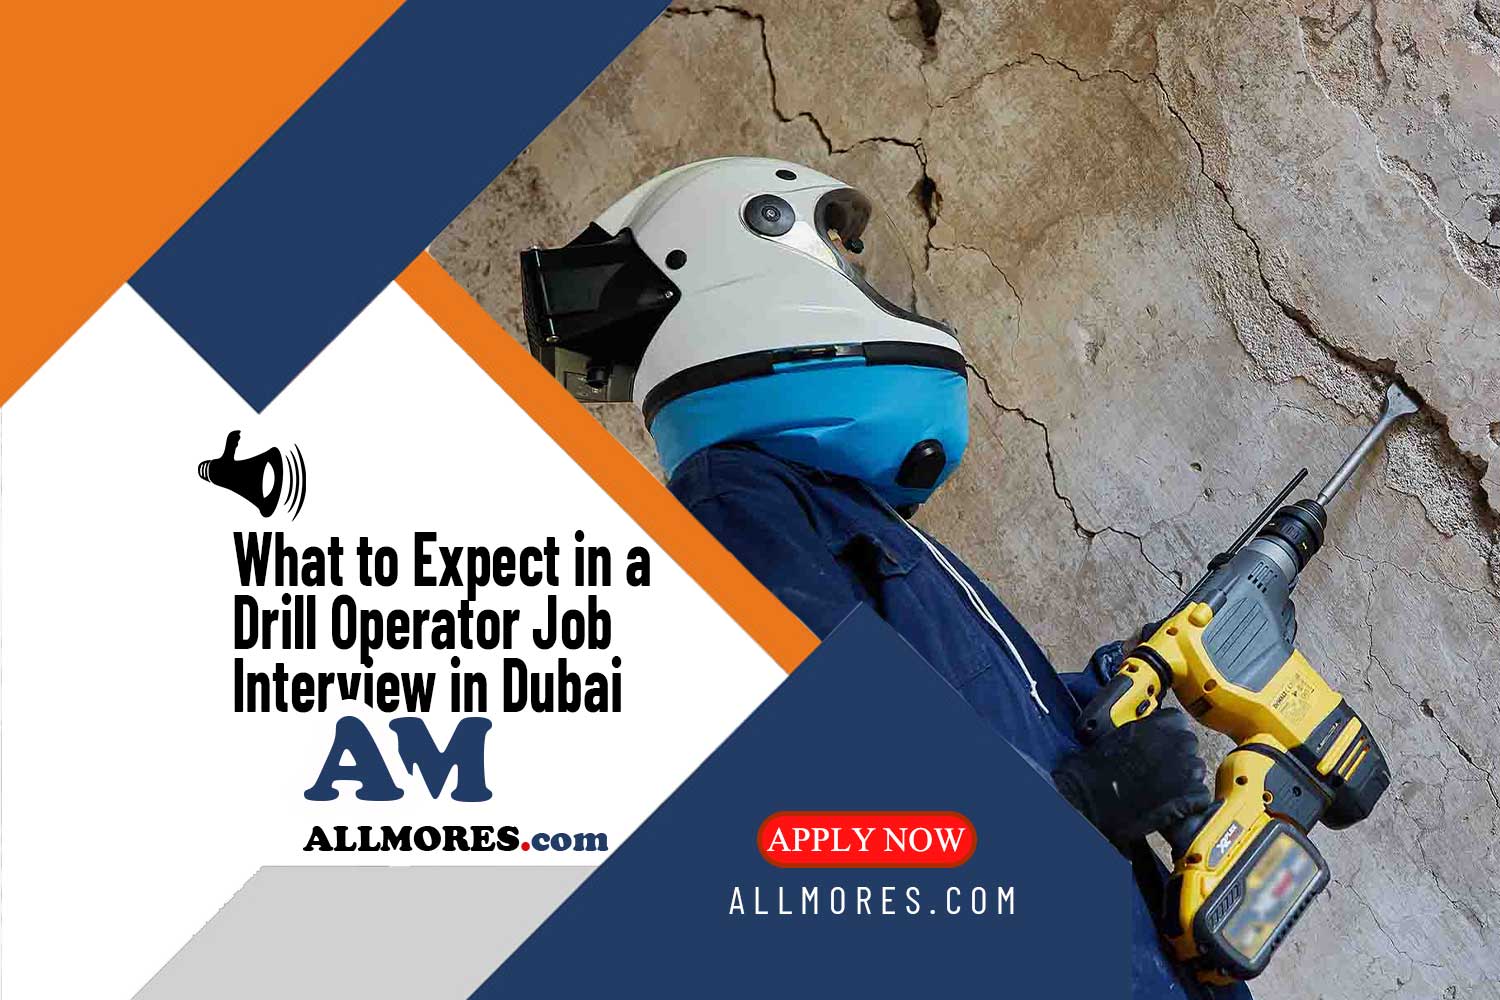 What to Expect in a Drill Operator Job Interview in Dubai